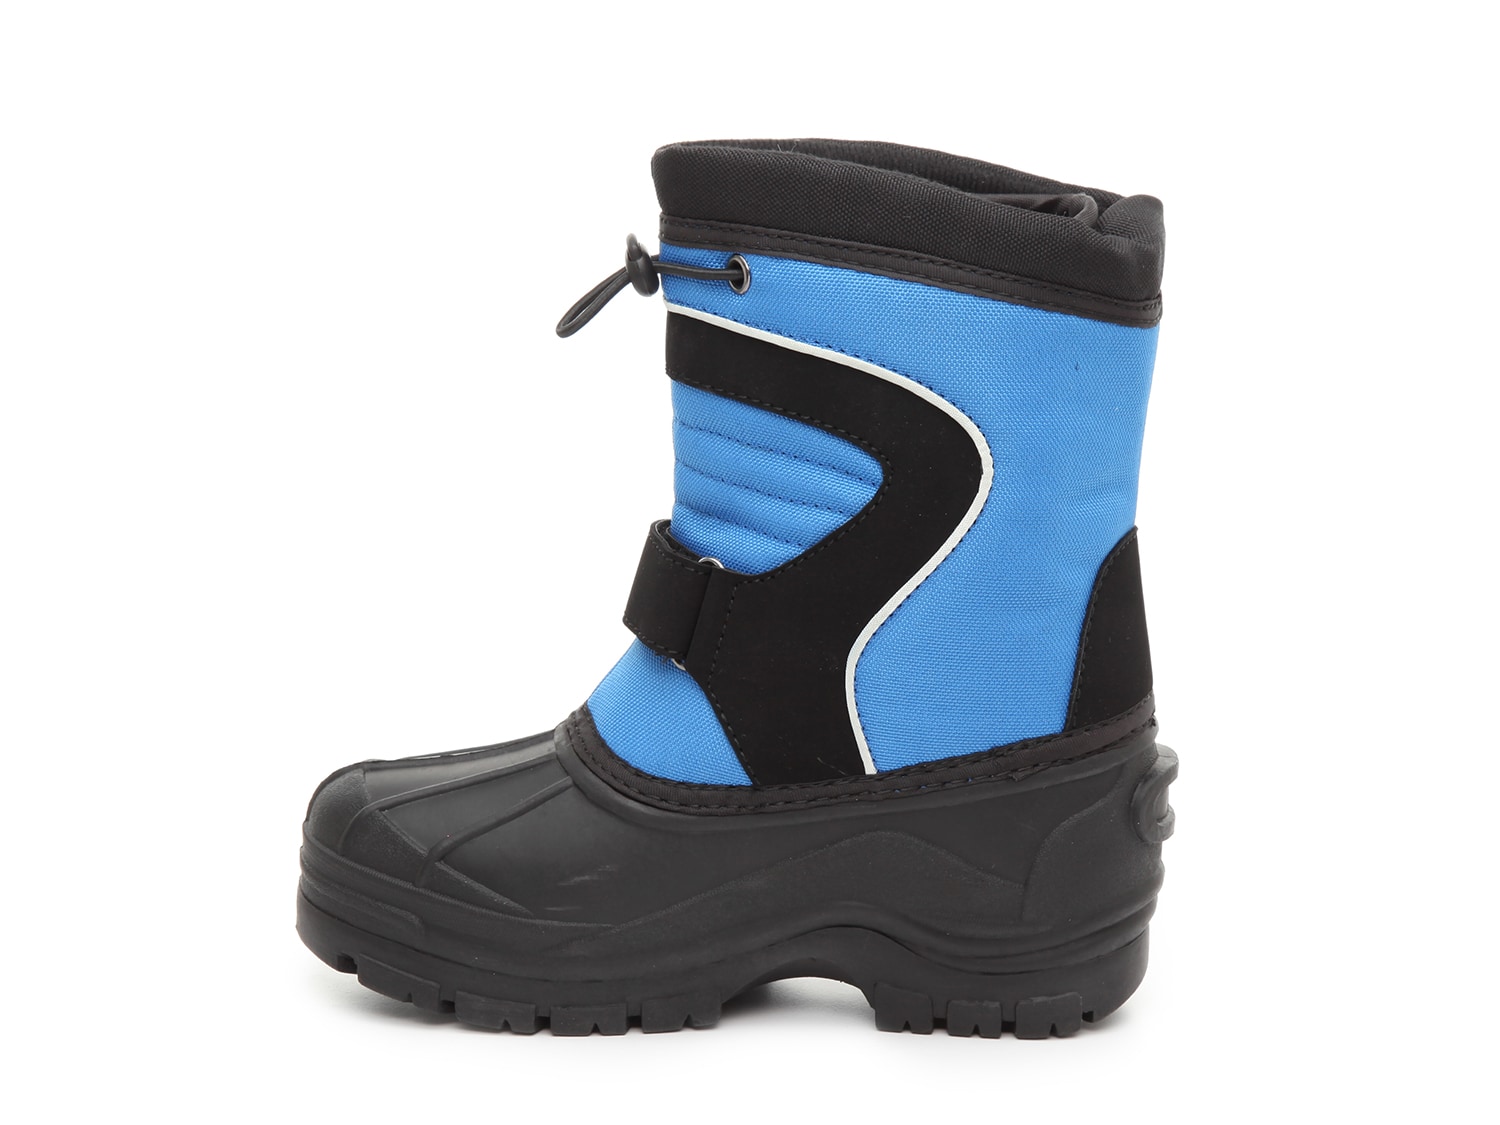 Totes Connor Snow Boot - Kids' | DSW